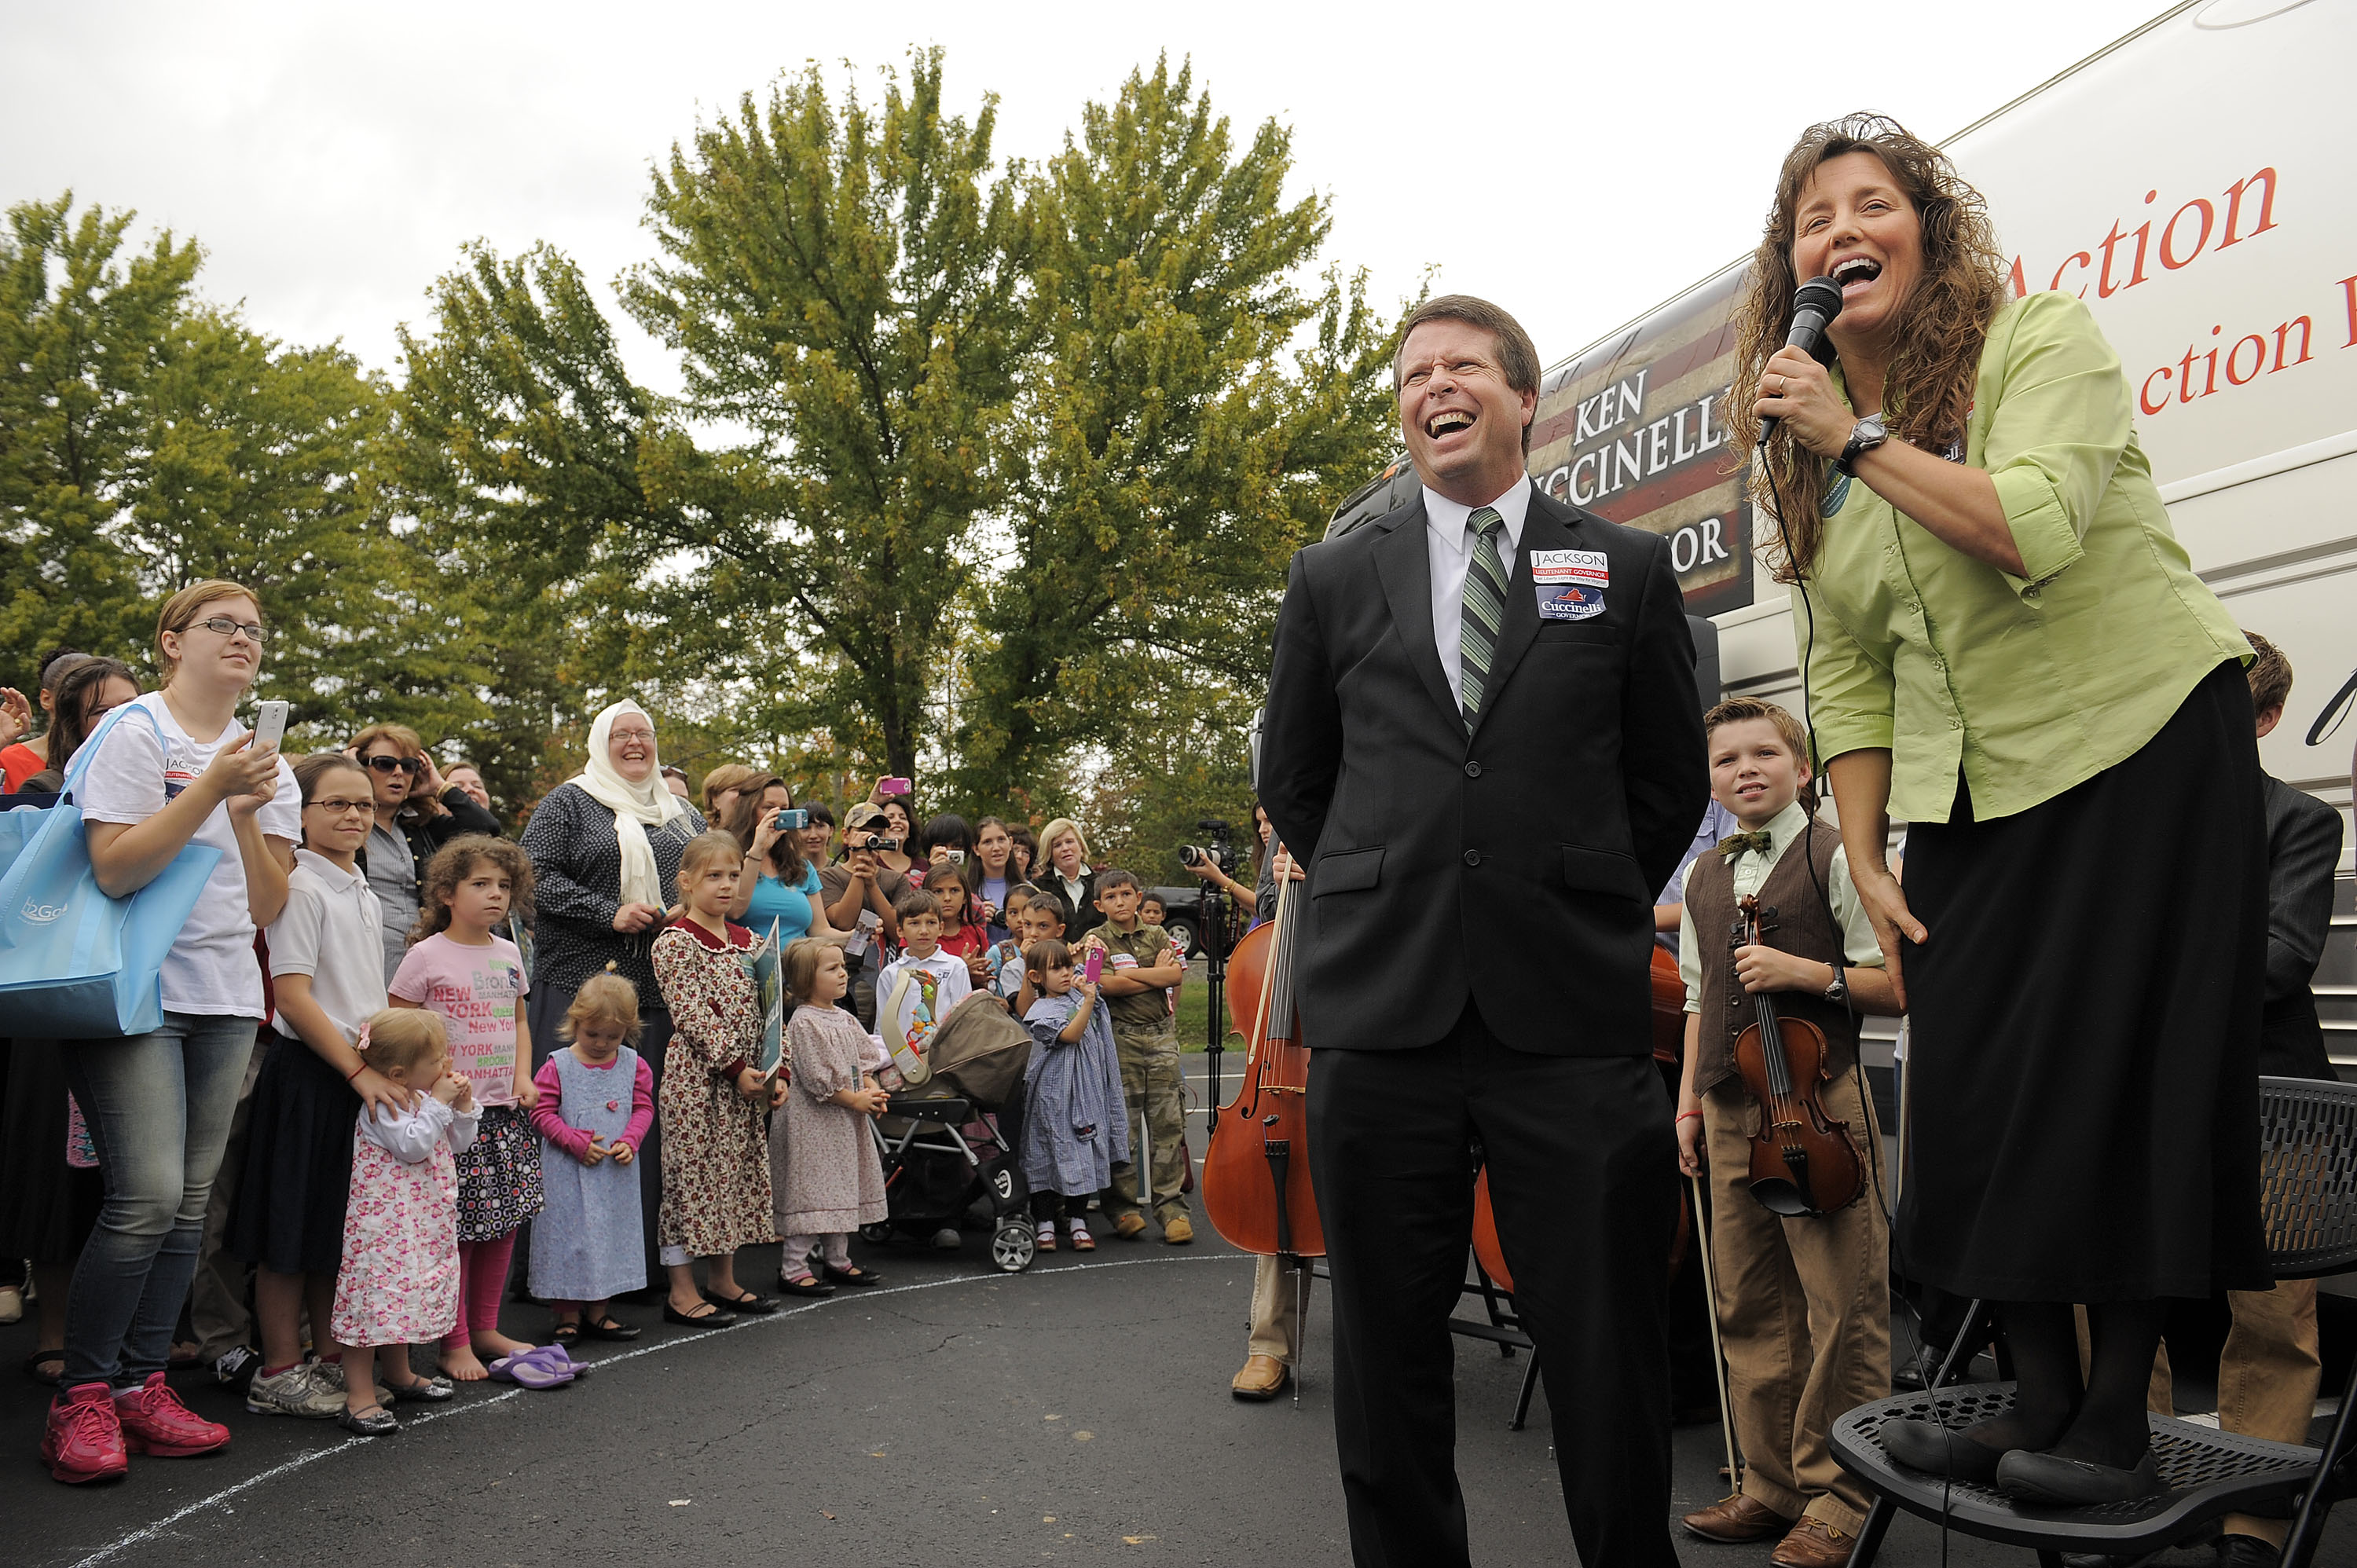 Reality telvision celebrities, Jim Bob Duggar, center, and his wife, Michelle Duggar make a stop on their 